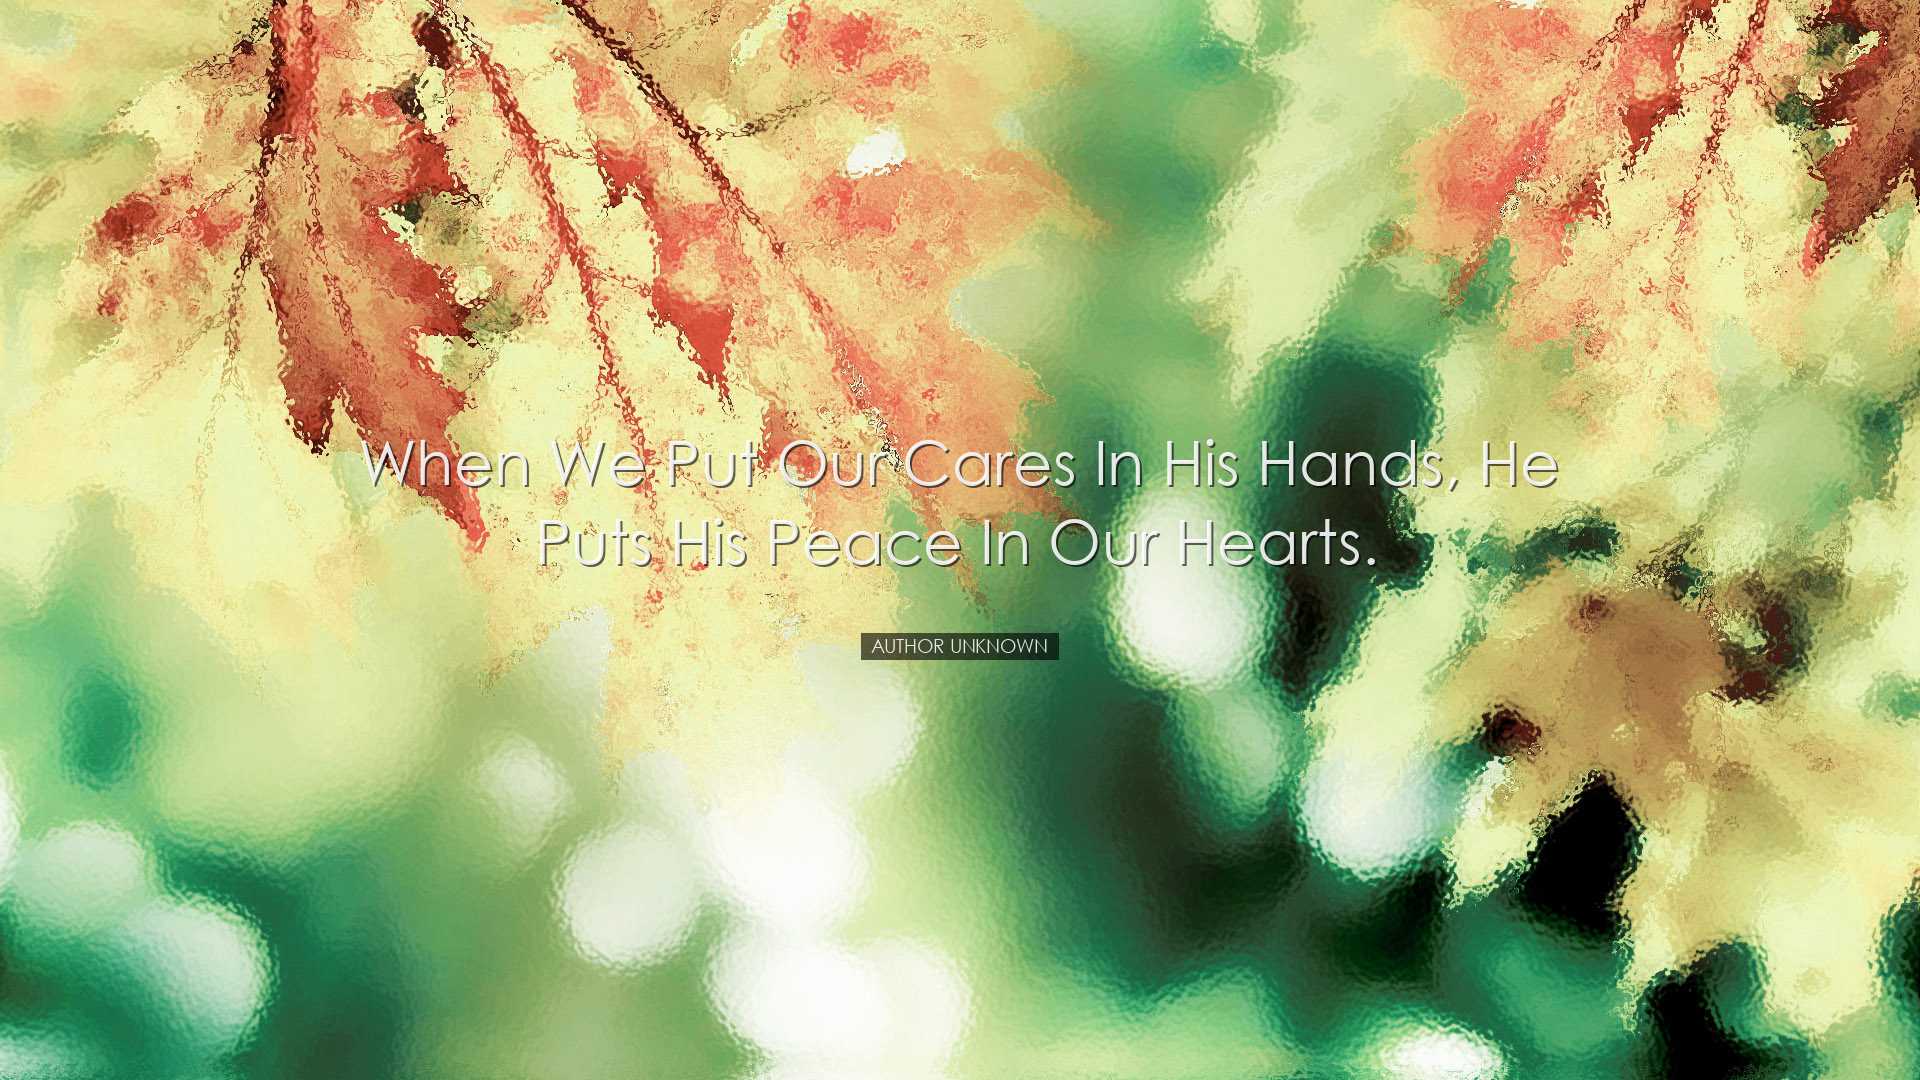 When we put our cares in His hands, He puts His peace in our heart